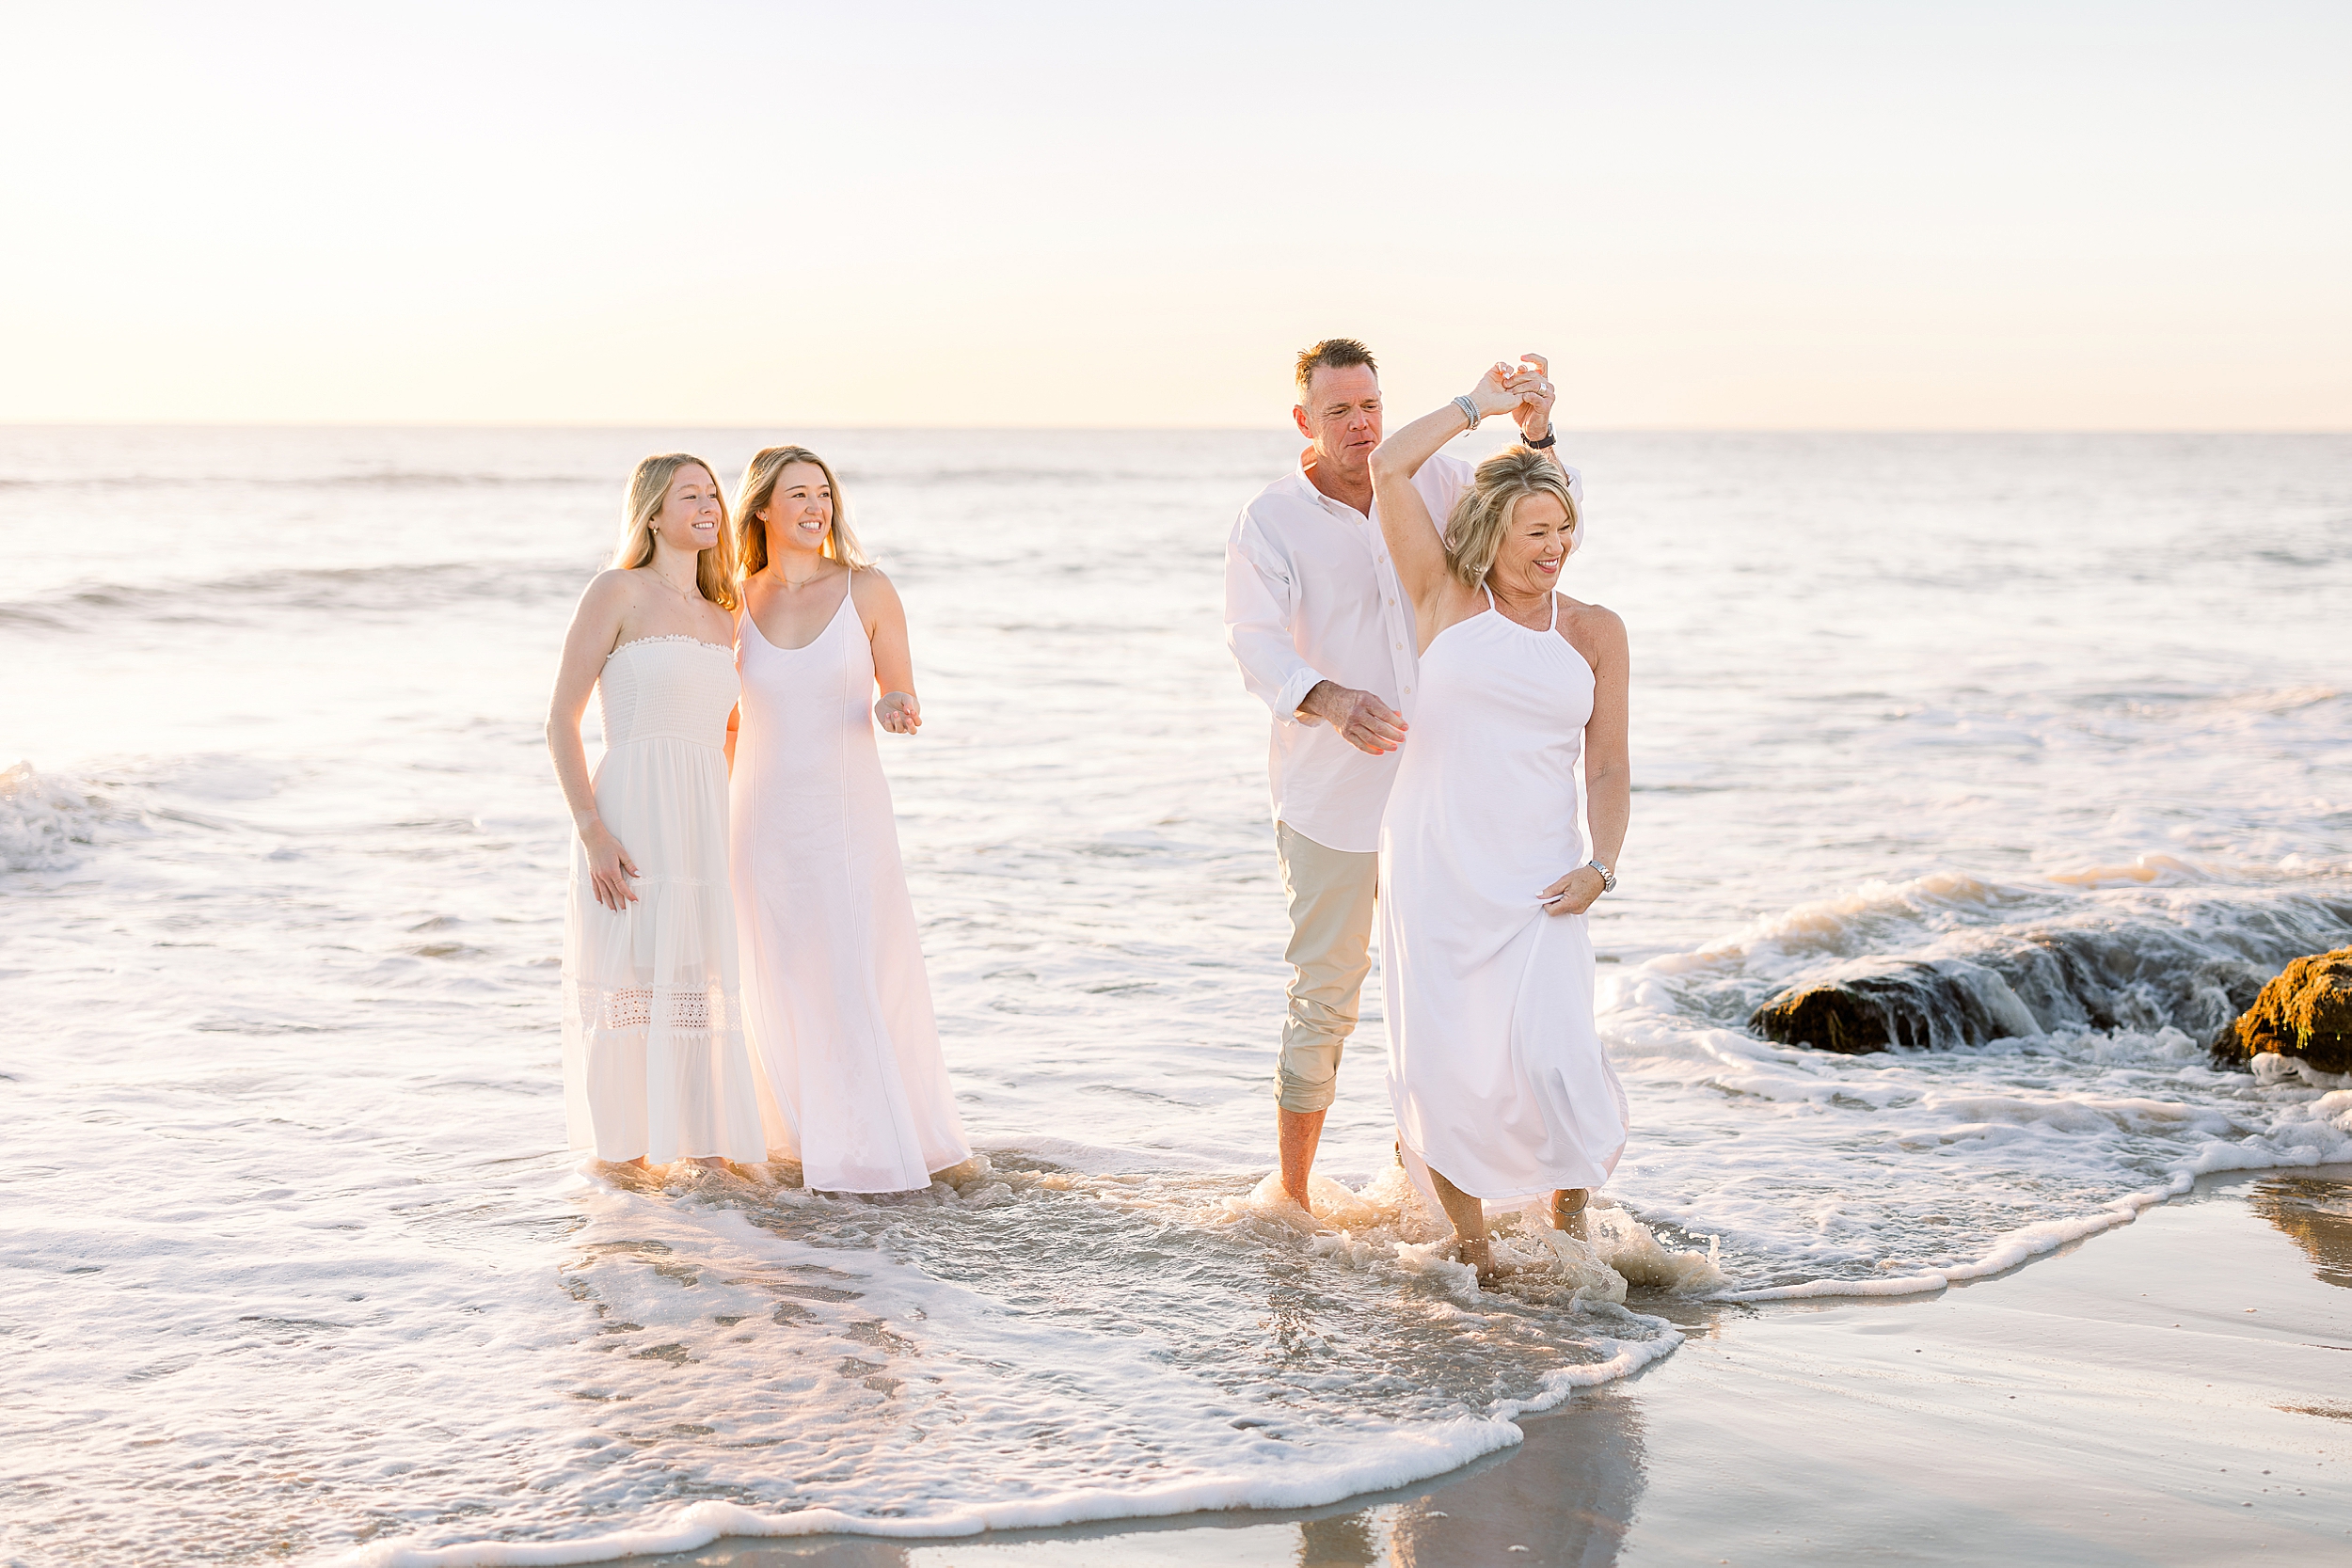 A family dressed in white playing together on the beach at sunrise.